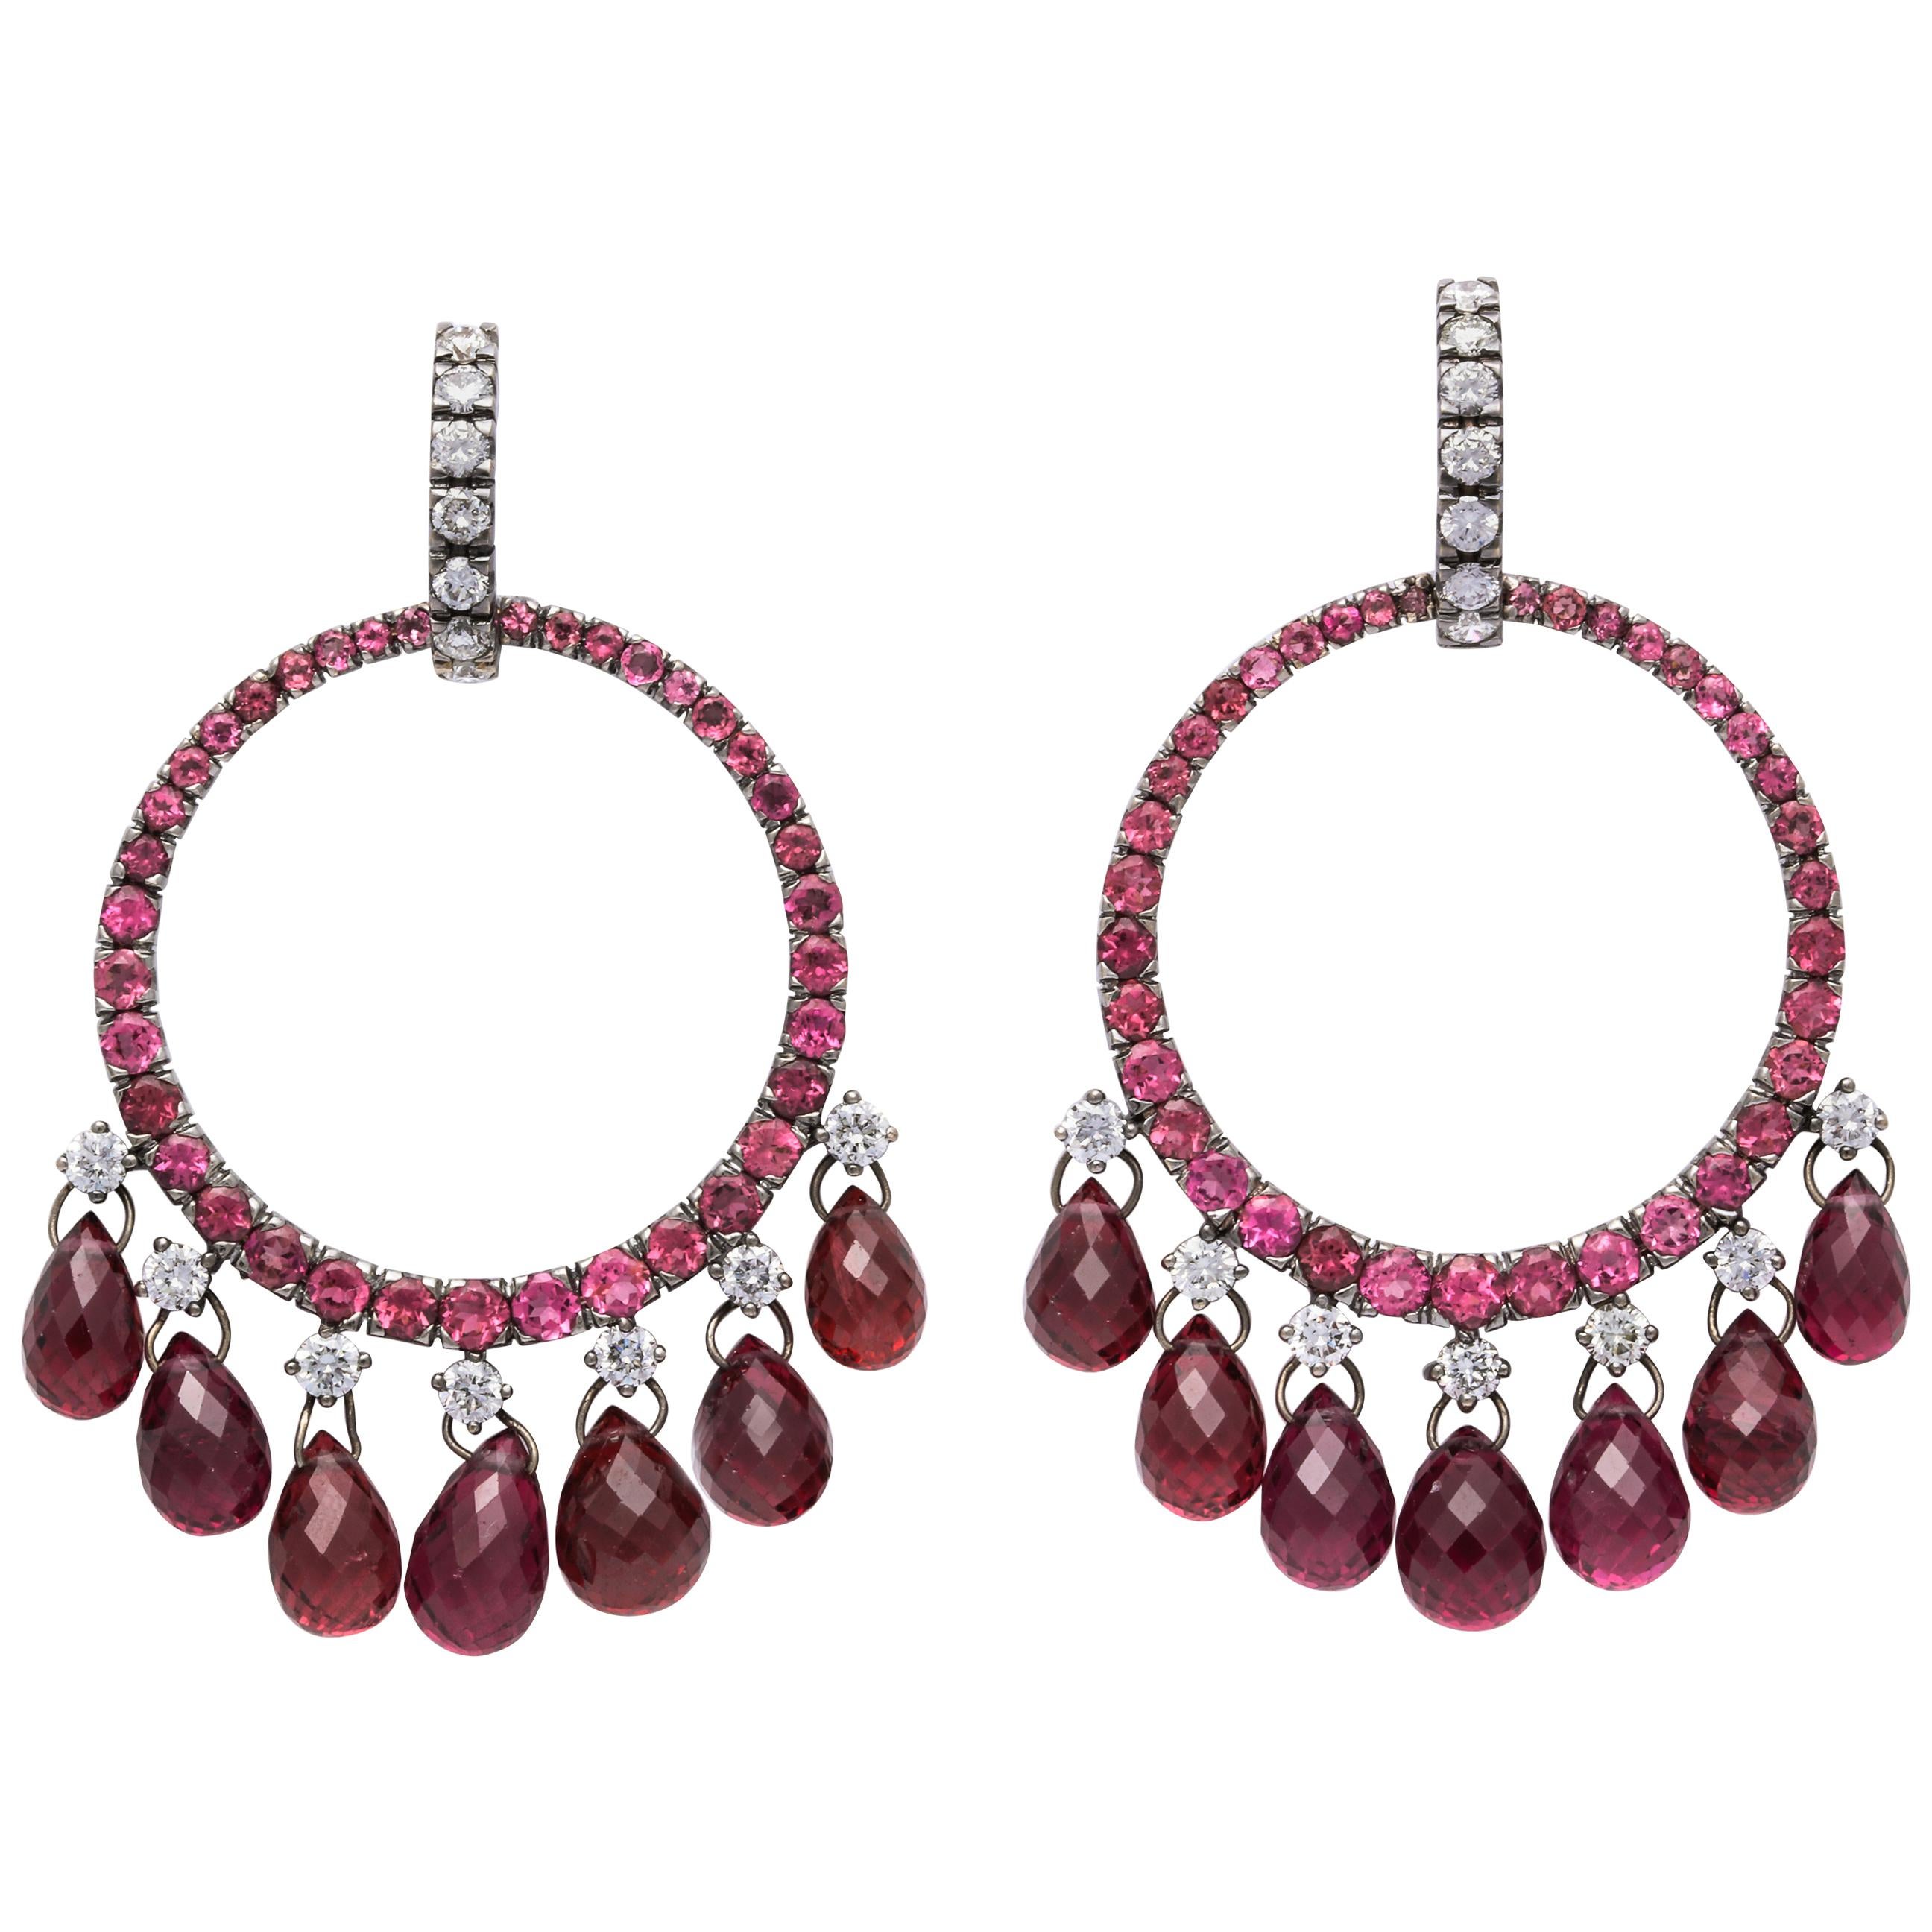 White Gold, Diamond and Pink Tourmaline Briolette Earrings For Sale